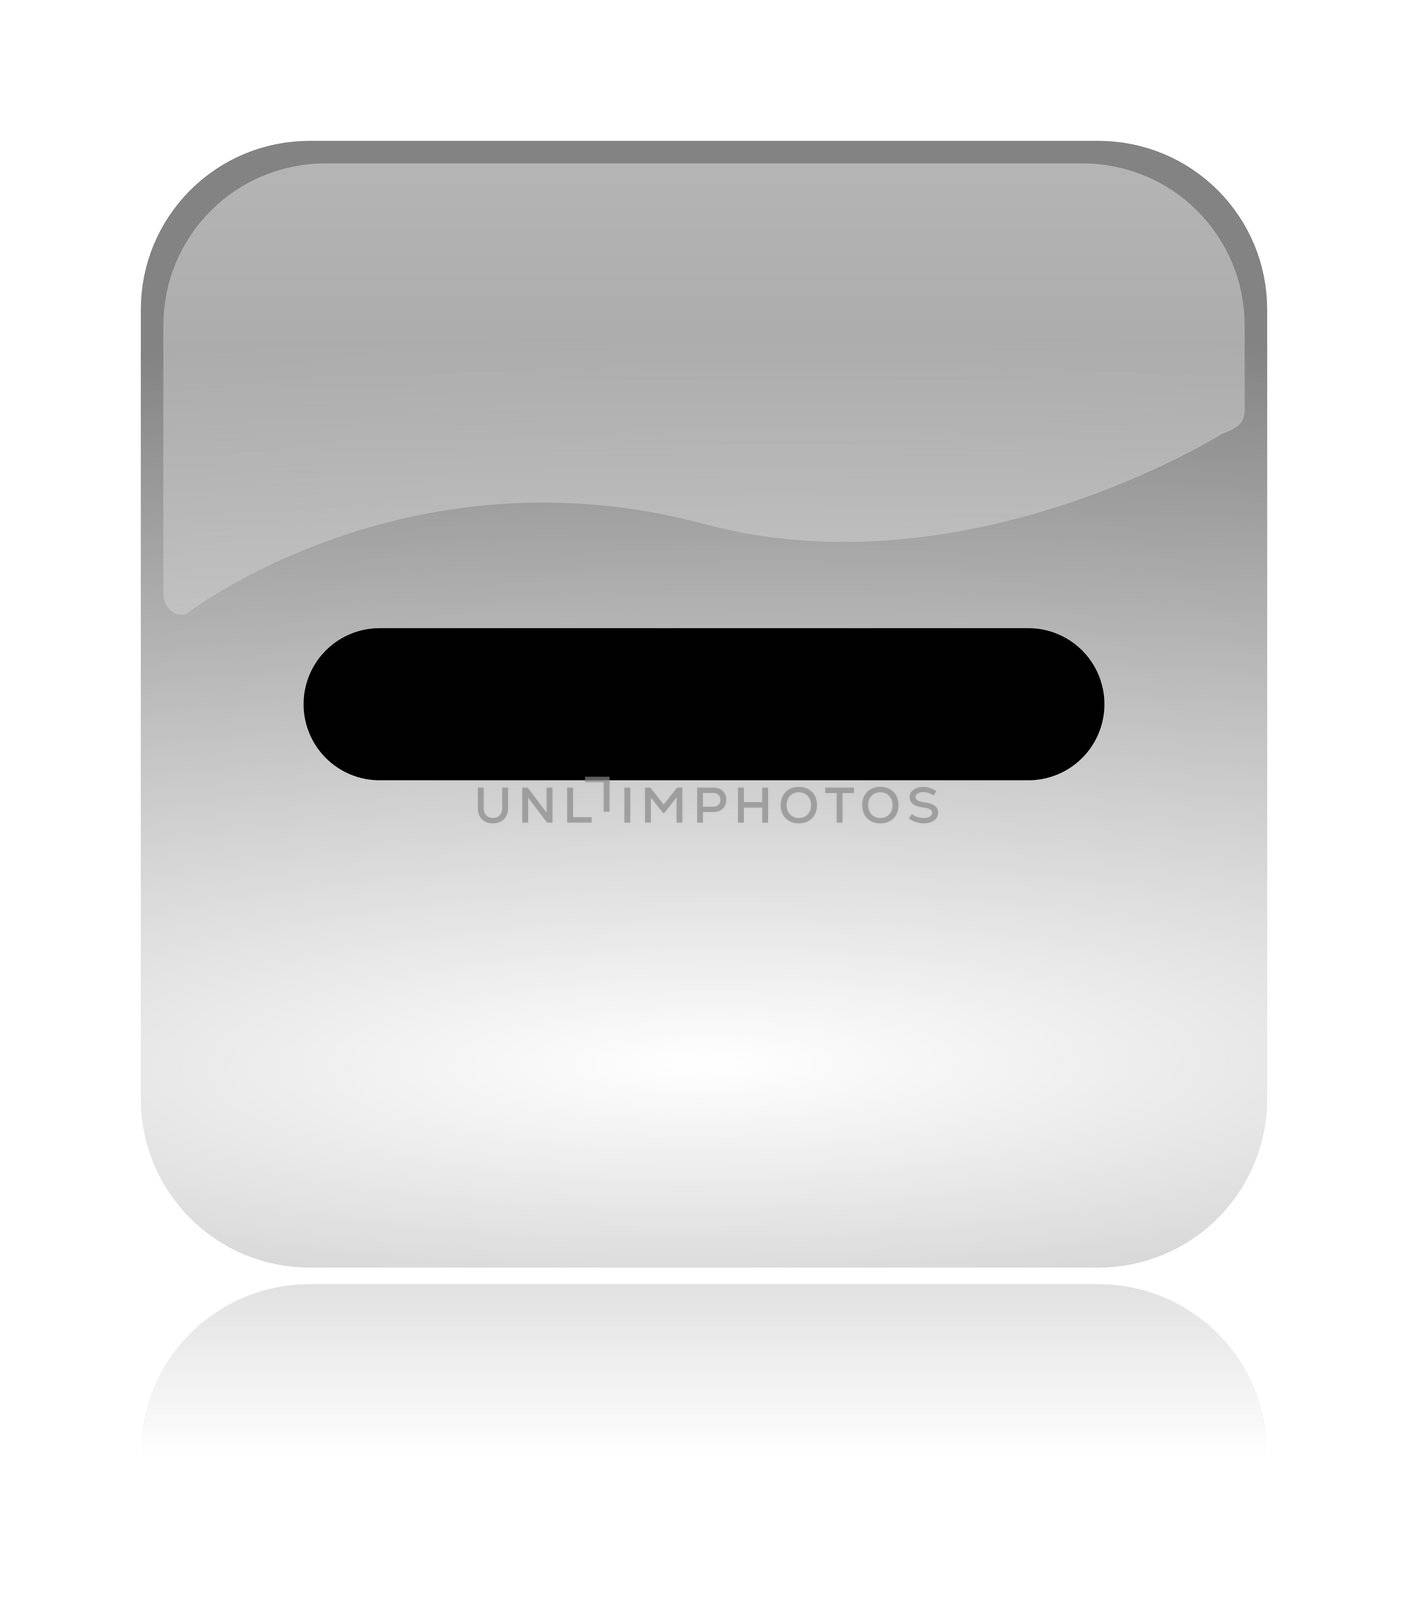 Minus detract white, transparent and glossy web interface icon with reflection